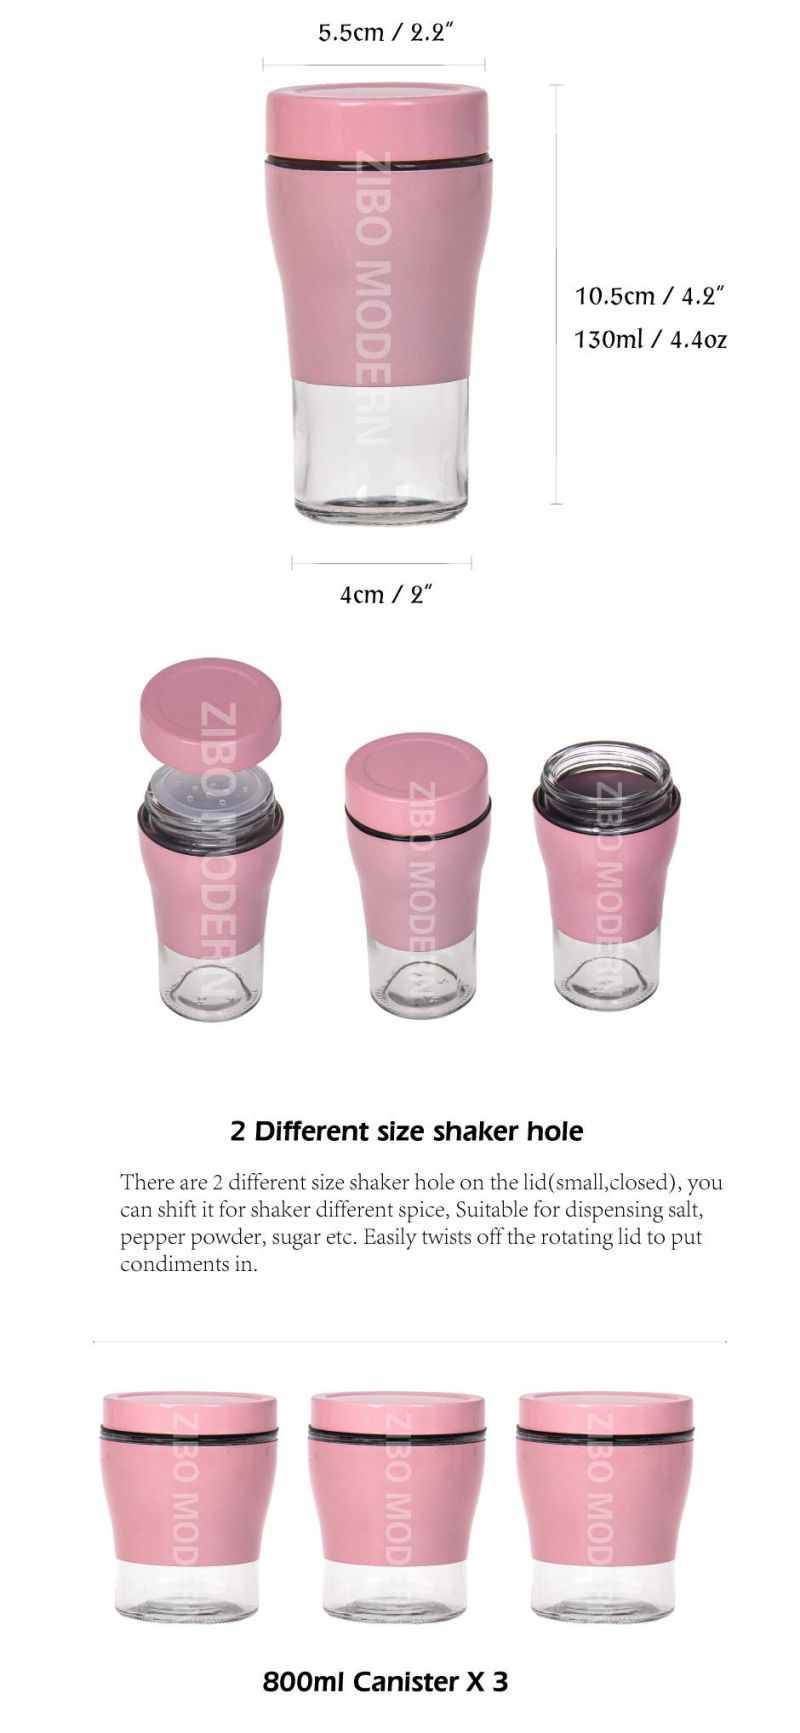 Coated Metal + Glass Pink Color Spice Rack Holder with 6 Shaker and 3 Canister - Spice Storage Rack